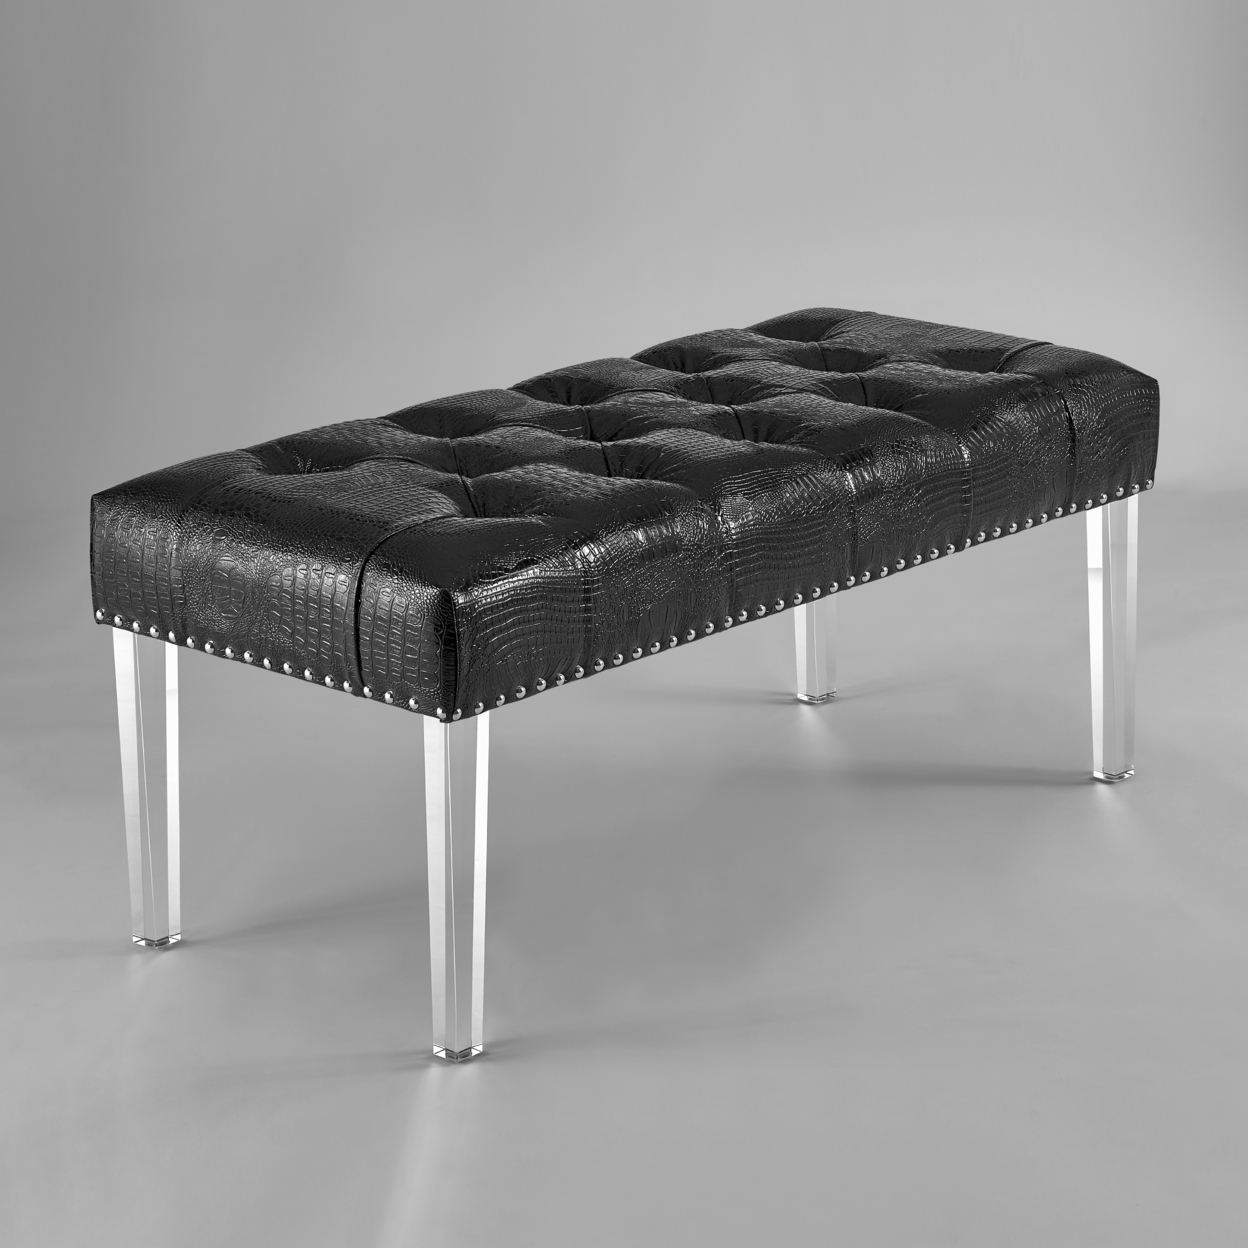 Iconic Home Teresa Bench Tufted Faux Leather Upholstered Acrylic Legs Nailhead Trim, Modern Transitional